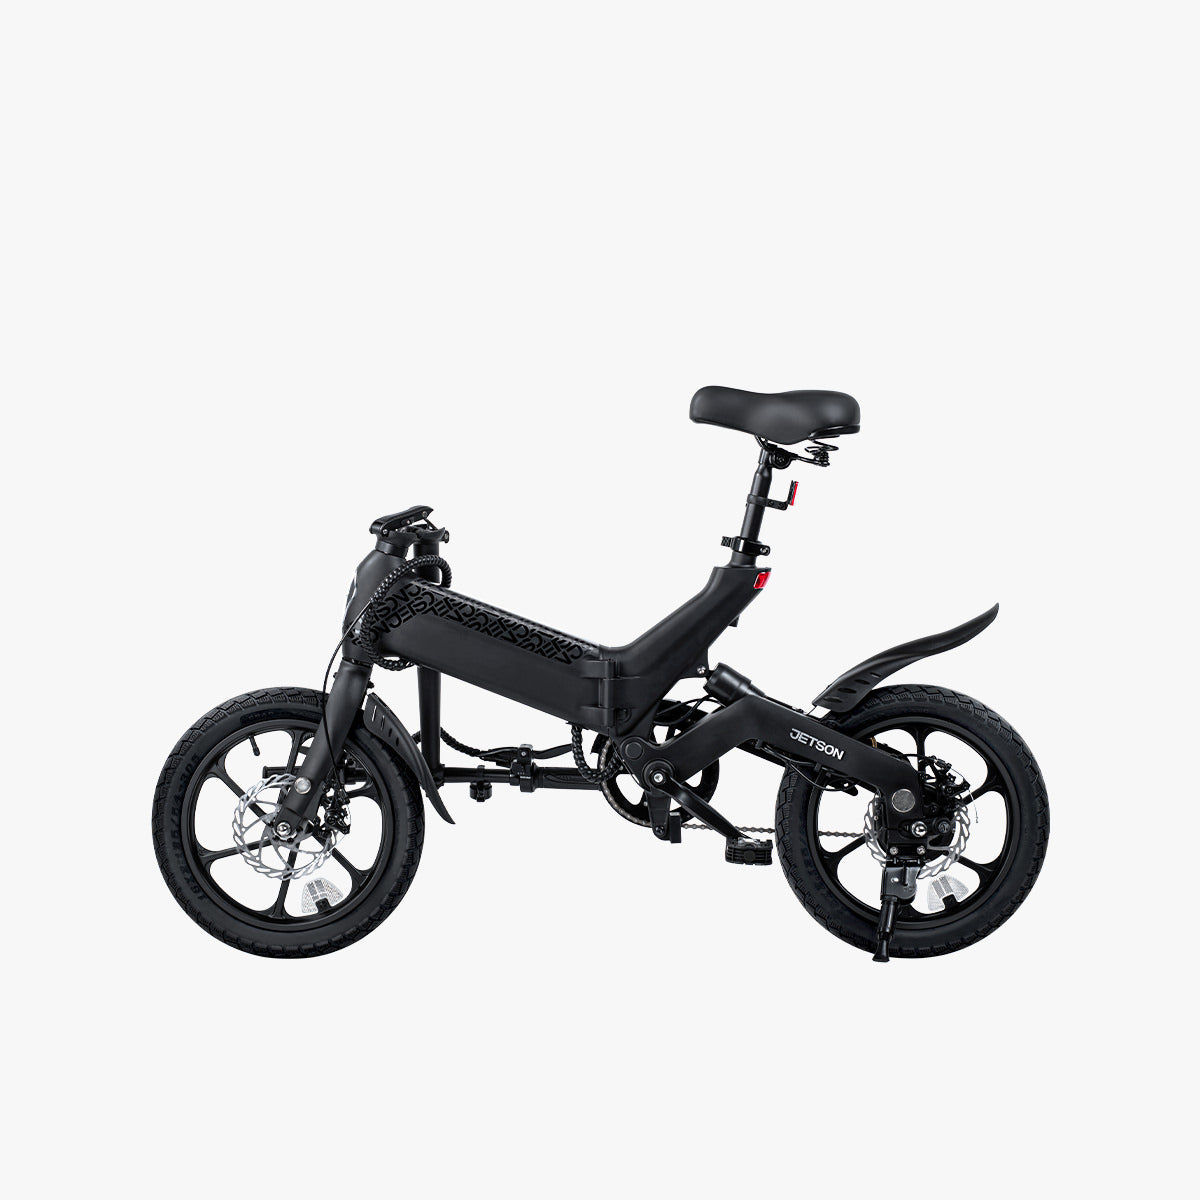 Haze electric bike facing left with front folded down